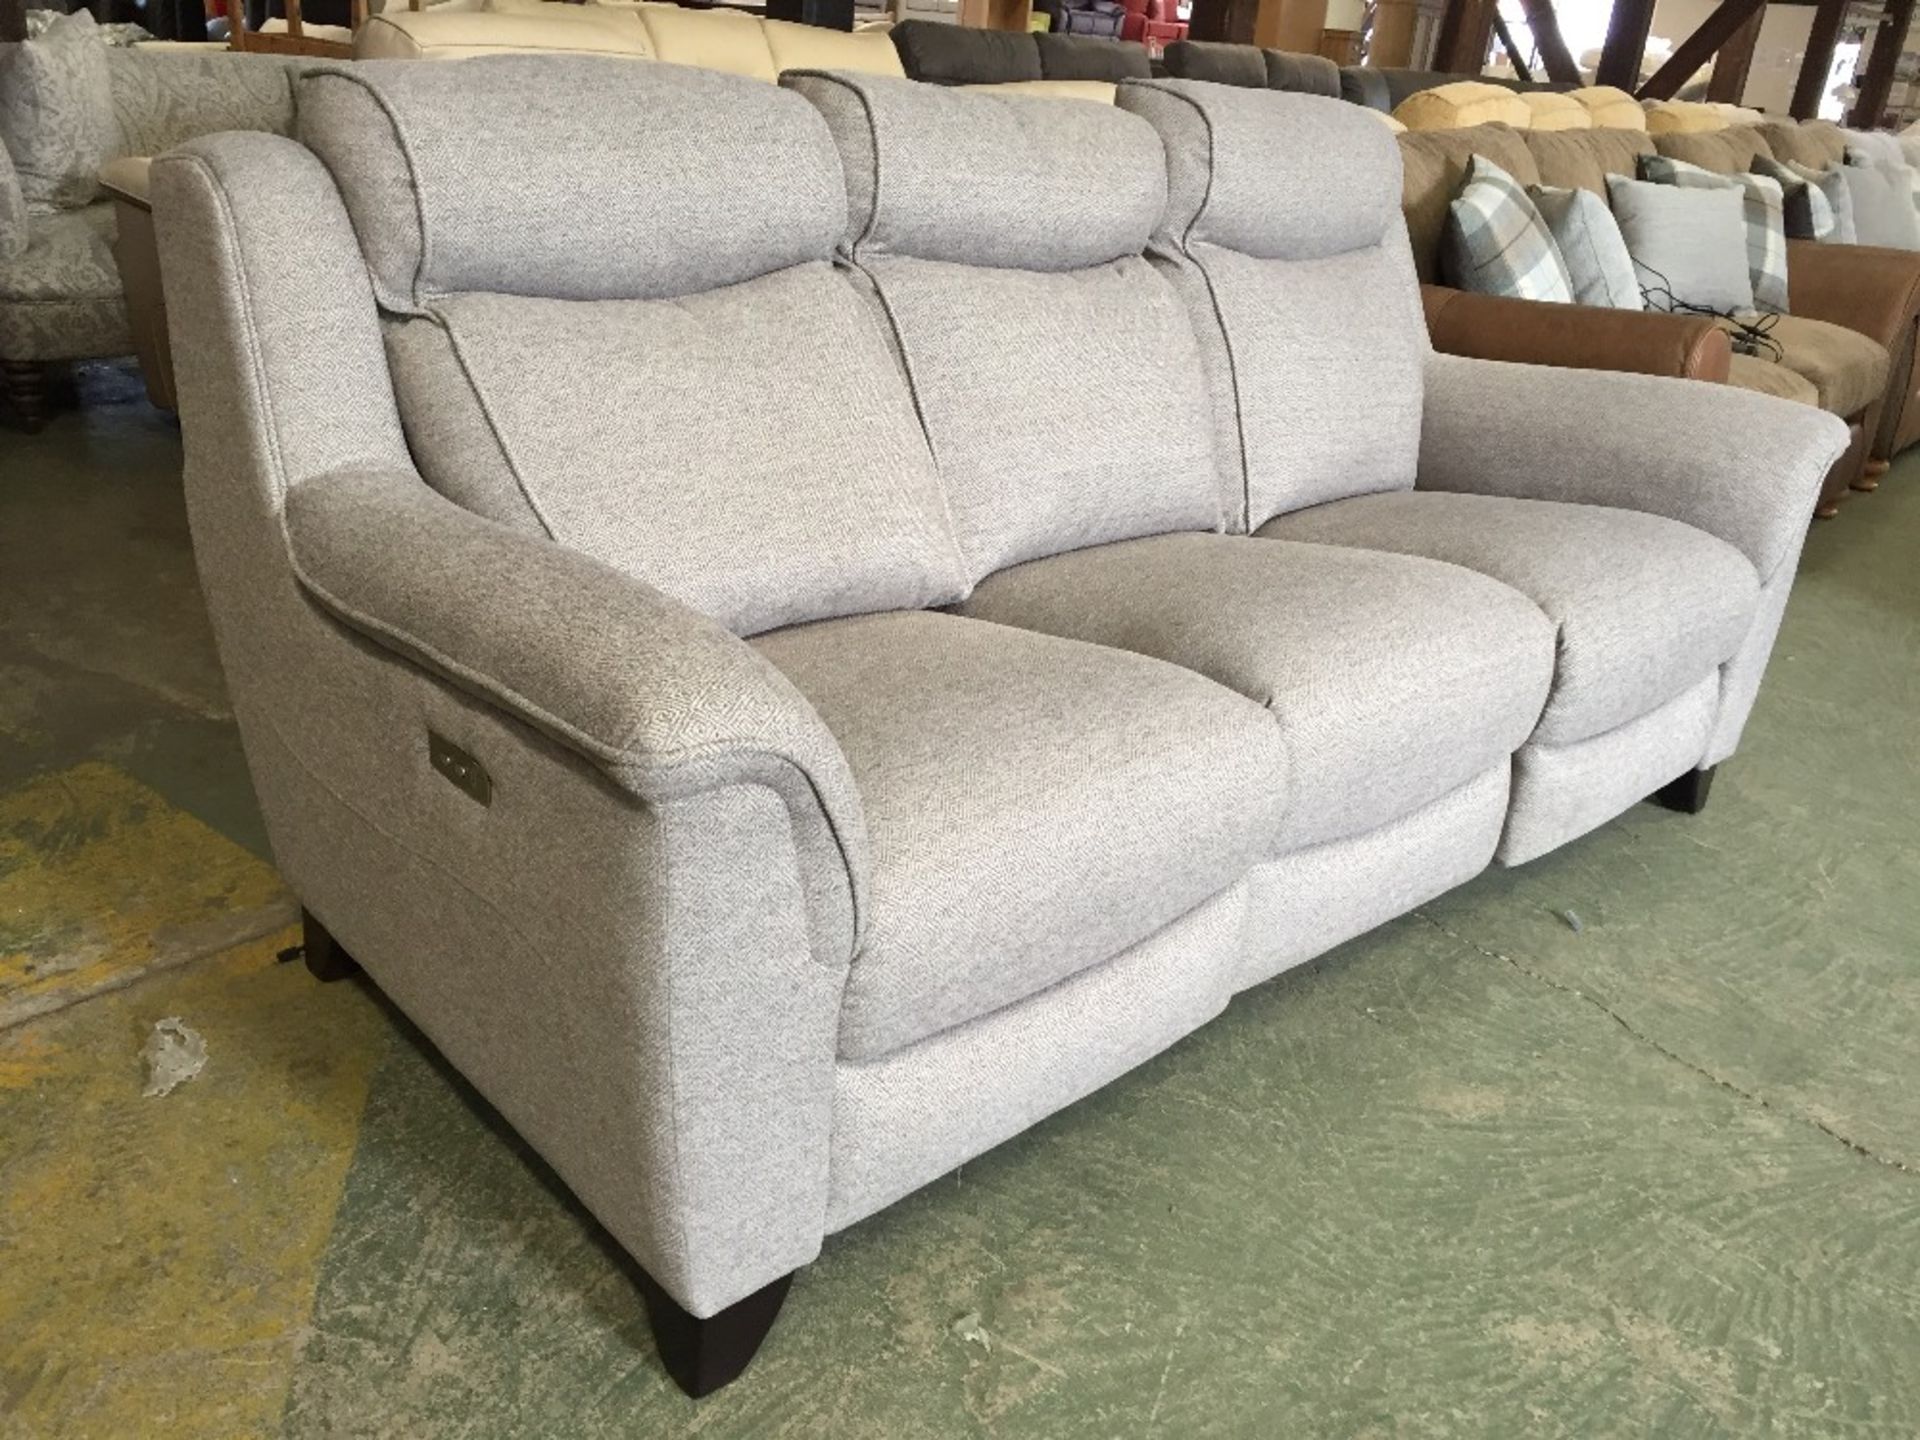 SILVER PATTERNED ELECTRIC RECLINING 3 SEATER SOFA